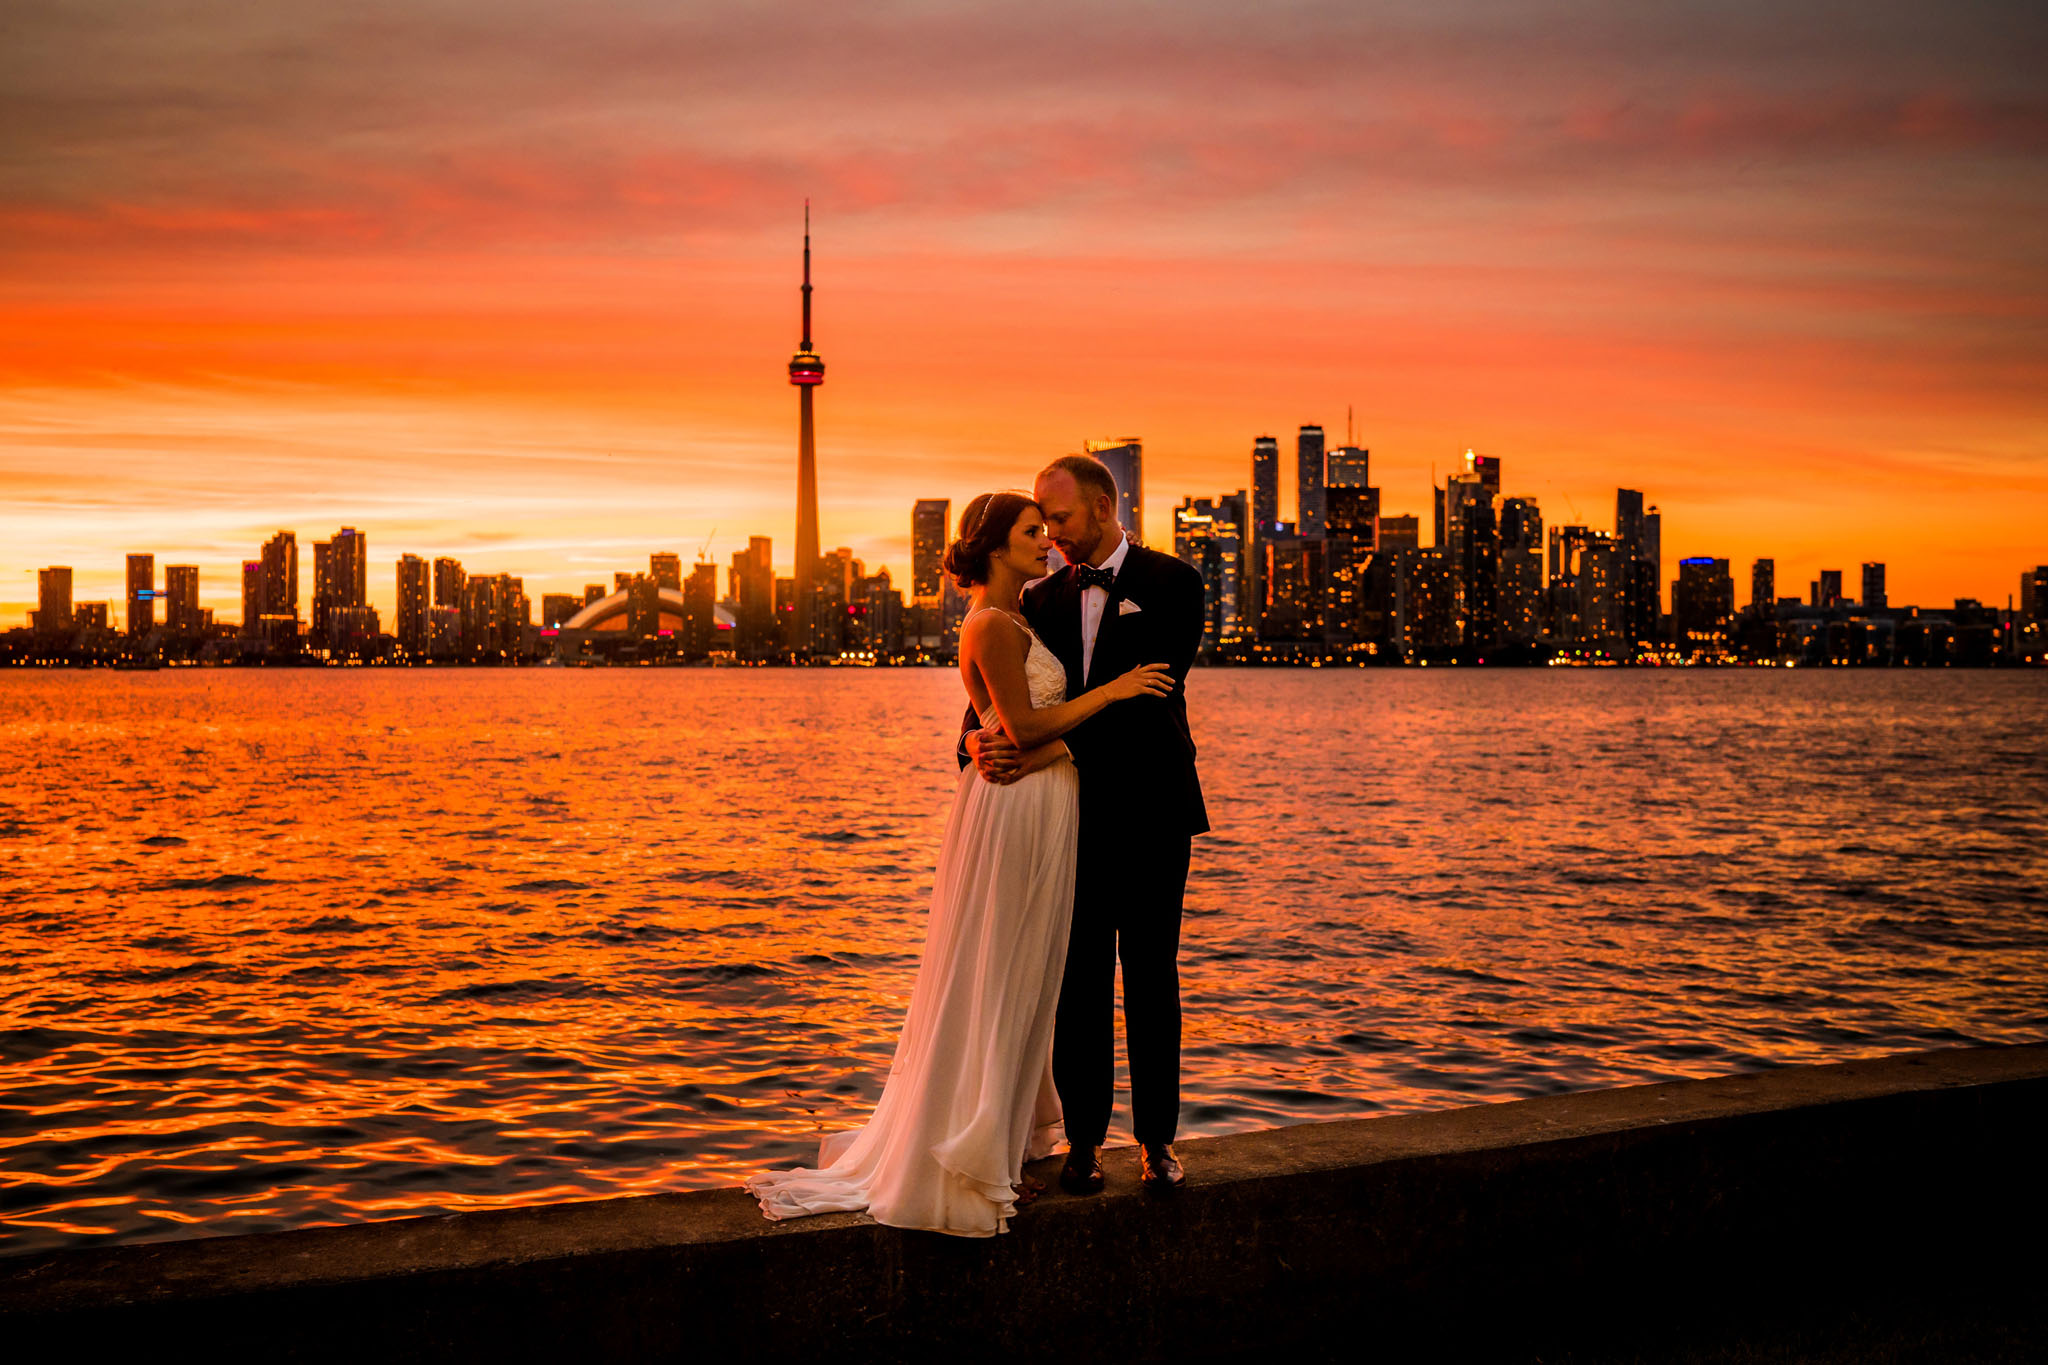 Sunset at the Royal Canadian Yacht Club. Gorgeous couple with red orange background. This one is definitely going in a frame!